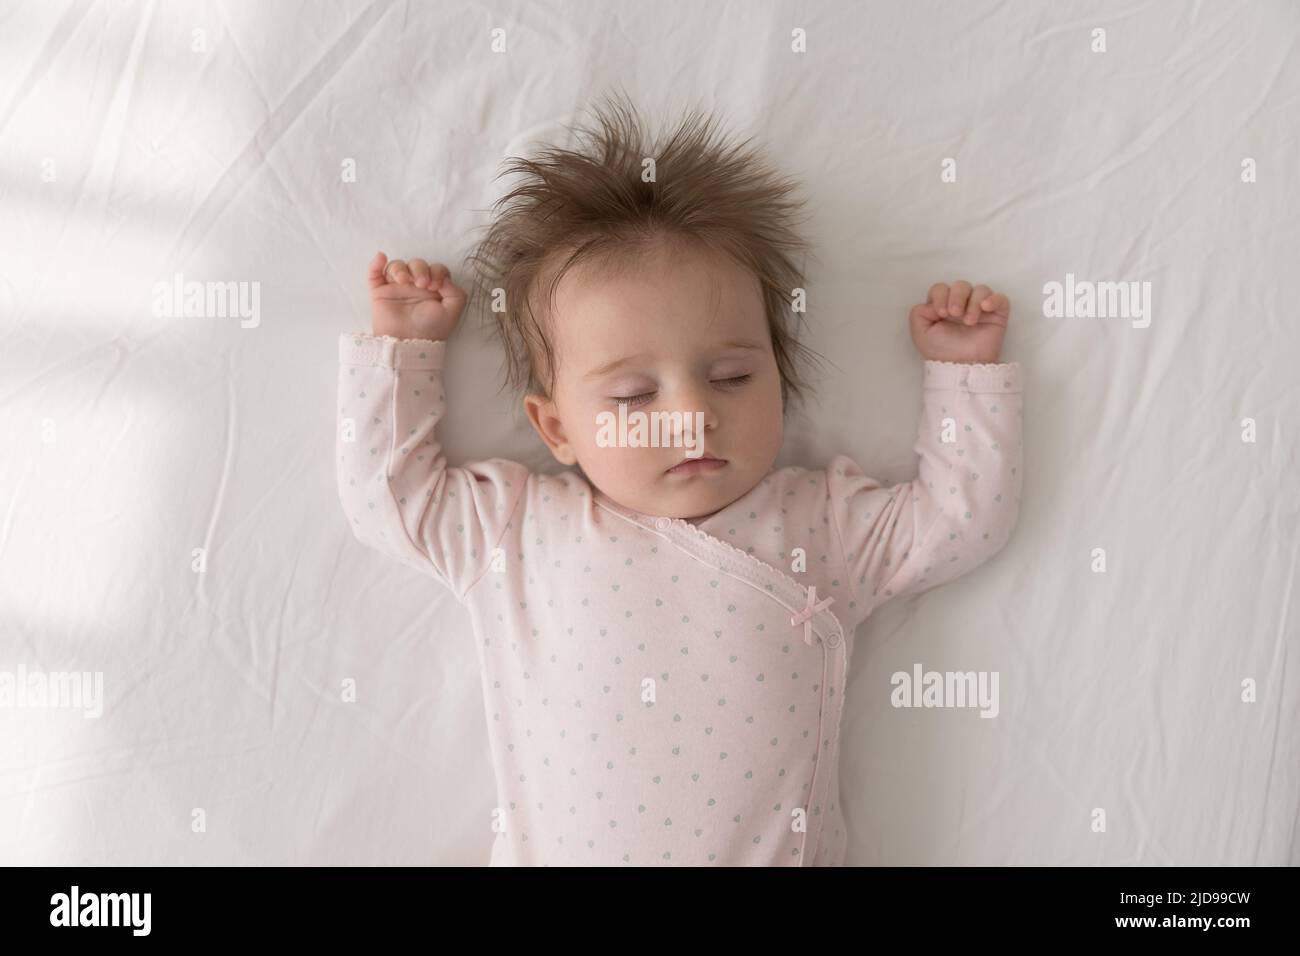 Cute baby sleeping alone on bed, above view Stock Photo